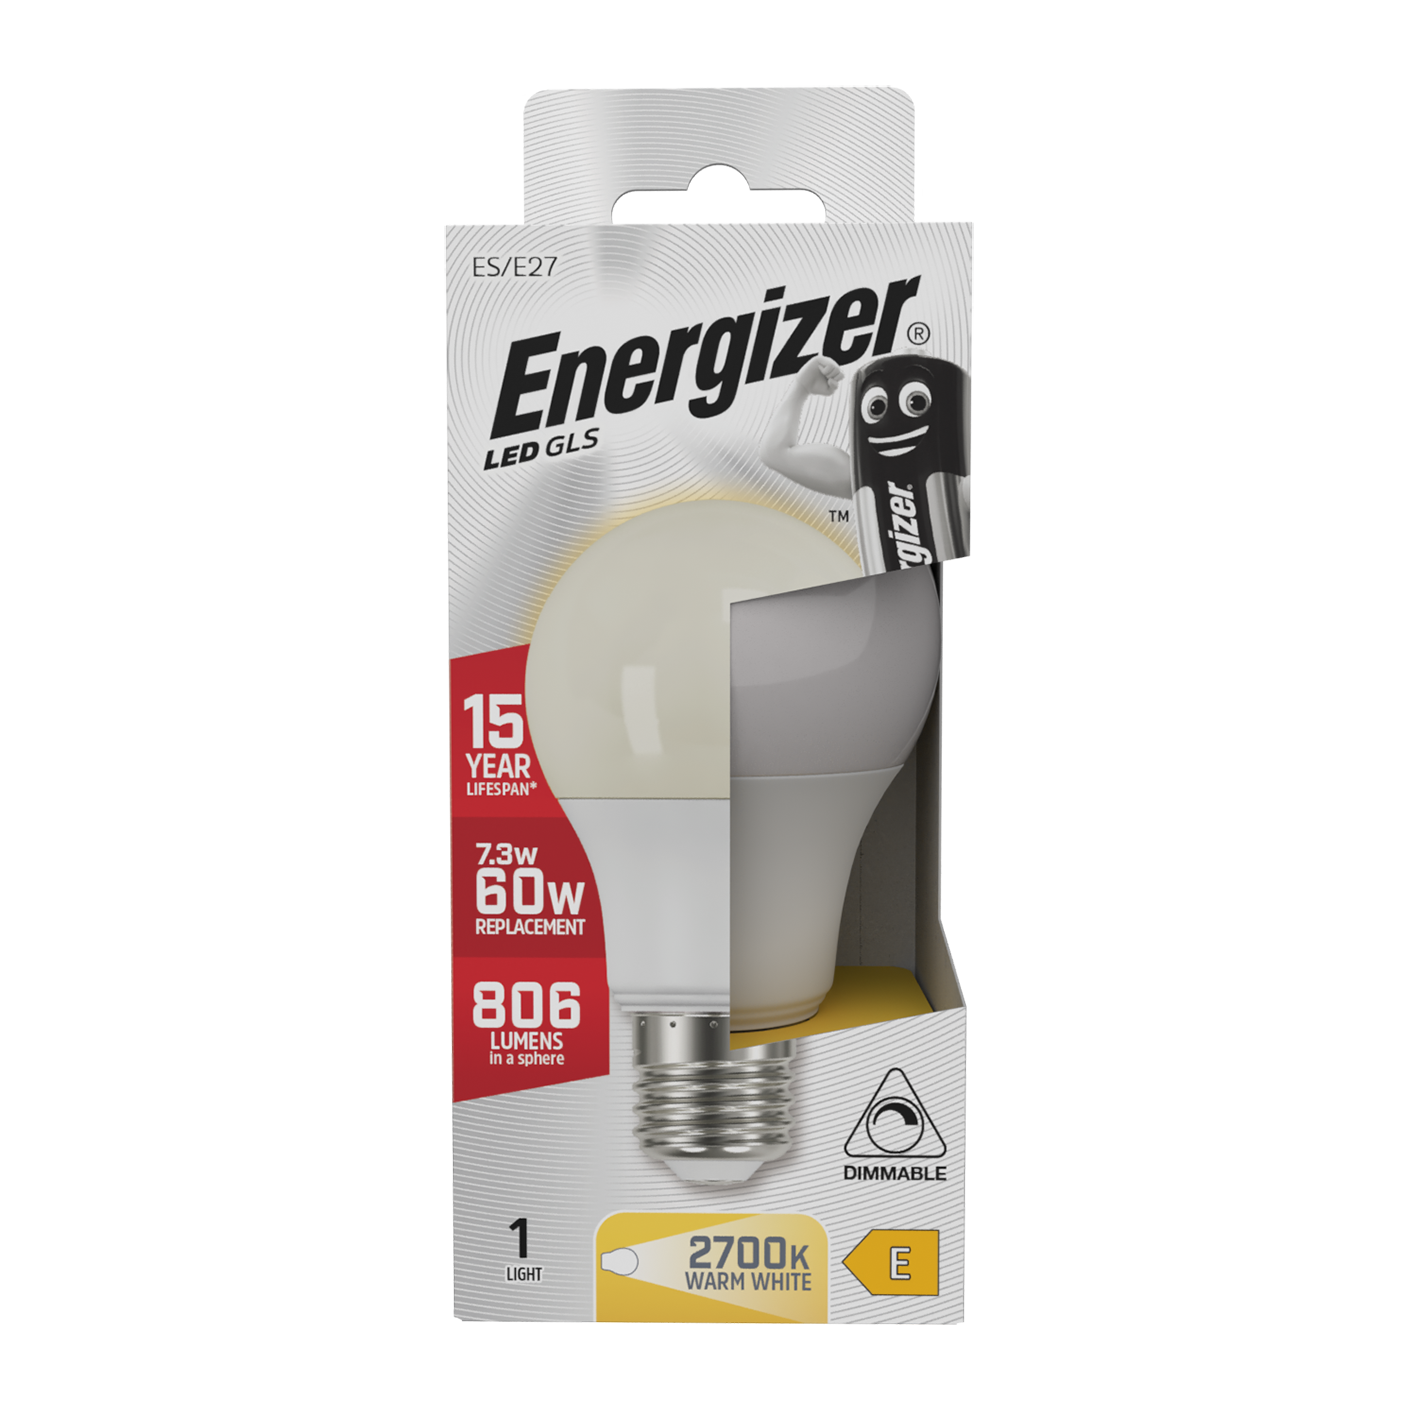 Energizer LED GLS E27 (ES) 806 Lumens 7.3W 2,700K (Warm White) Dimmable, Box of 1